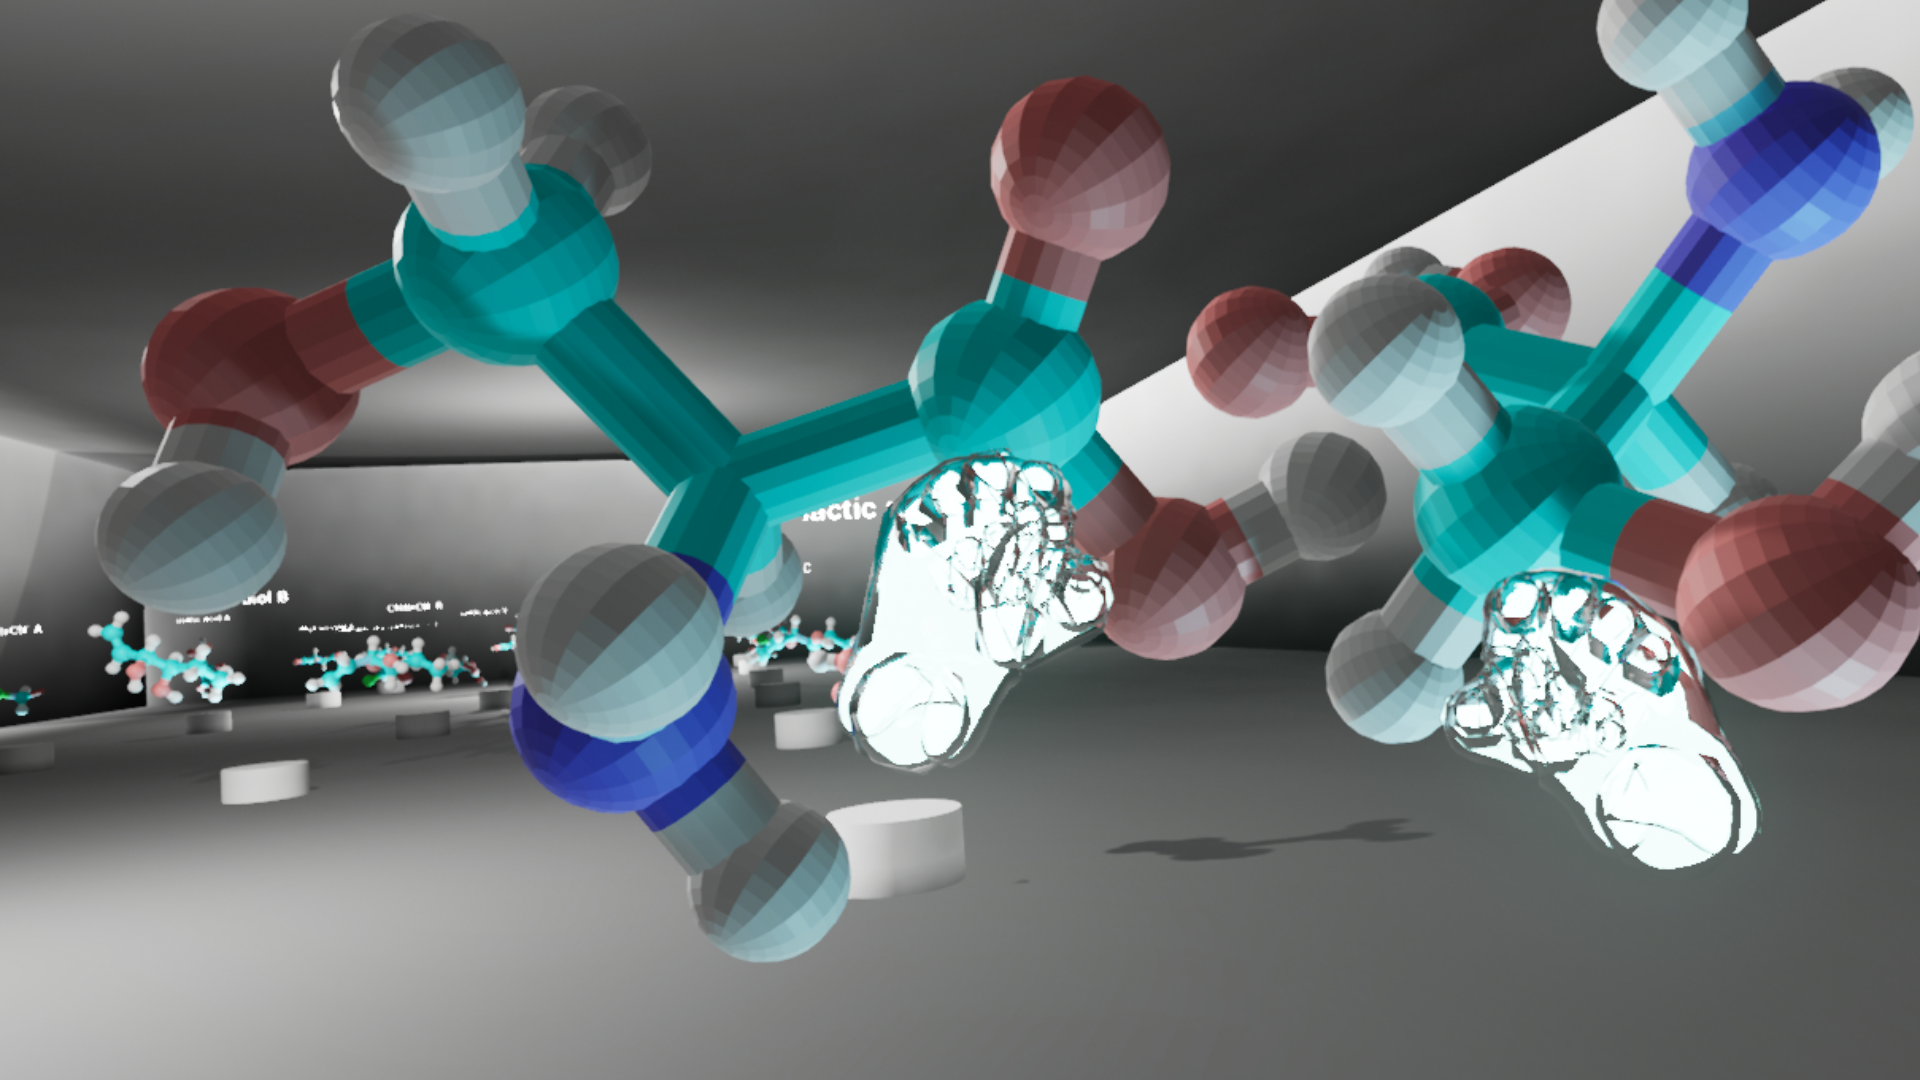 Screenshot of the Chirality VR experience displaying two 3D models being manipulated by virtual hands.